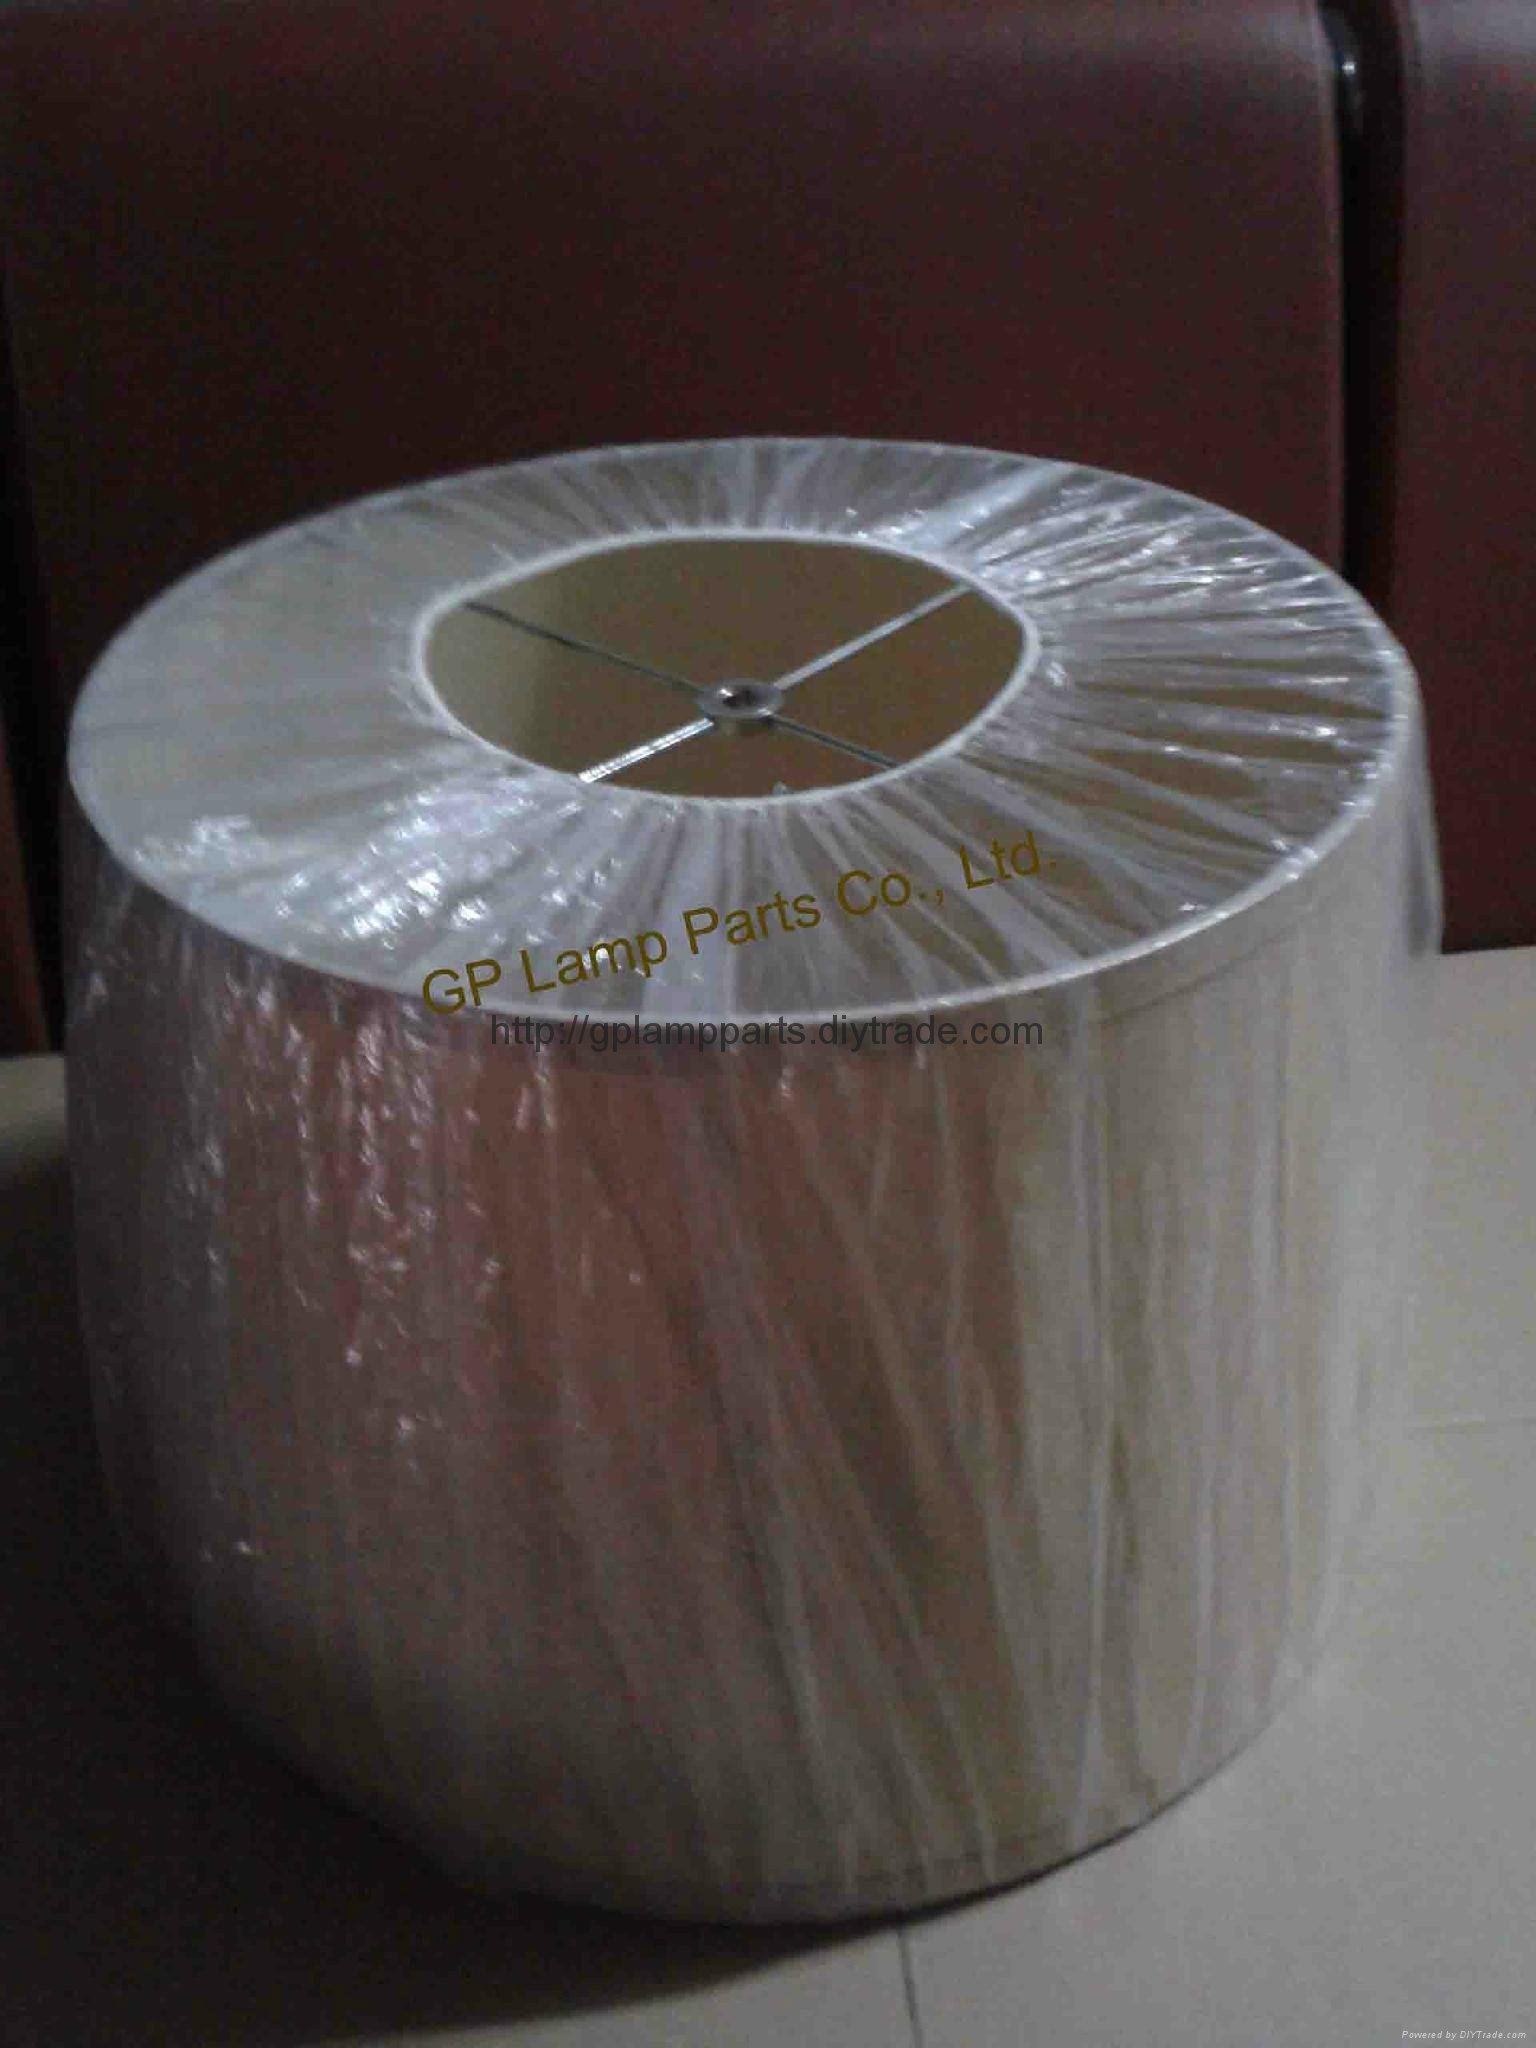 Lampshade covers - LDPE lamp shade anti-dust covers - lampshade wrapping covers